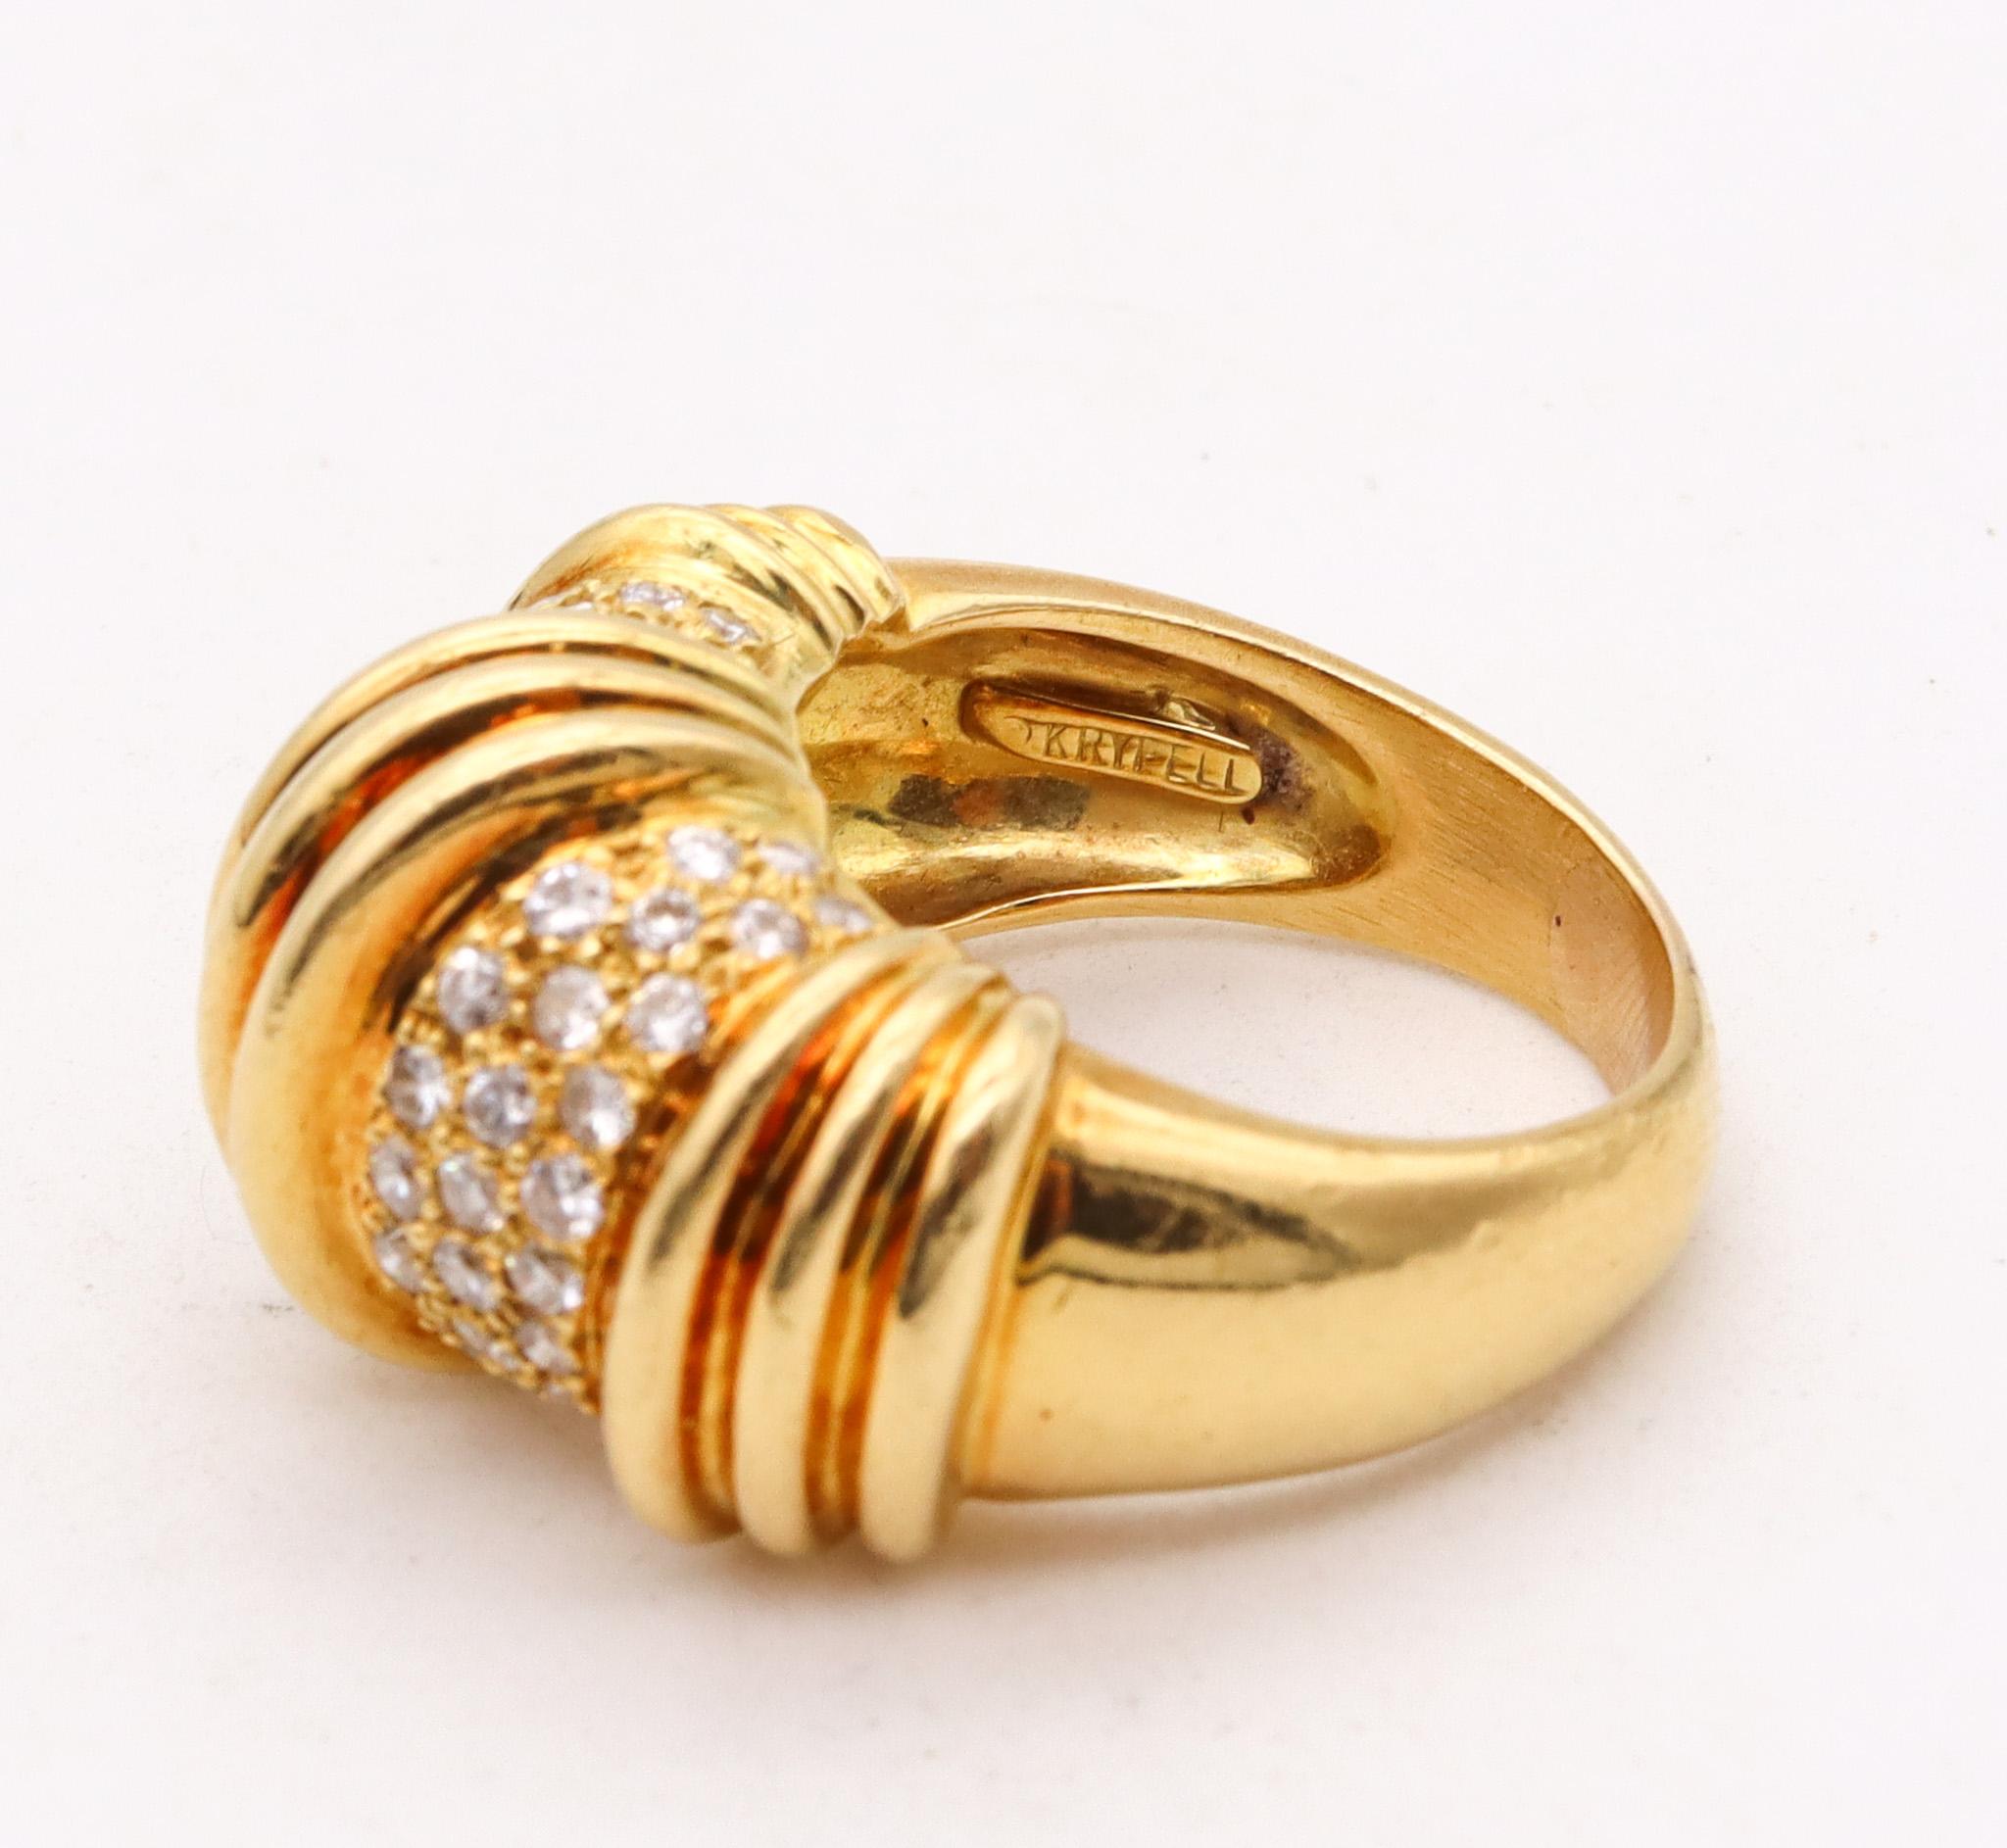 Charles Krypell Modernist Cocktail Ring In 18Kt Gold With 1.08 Cts In Diamonds 2